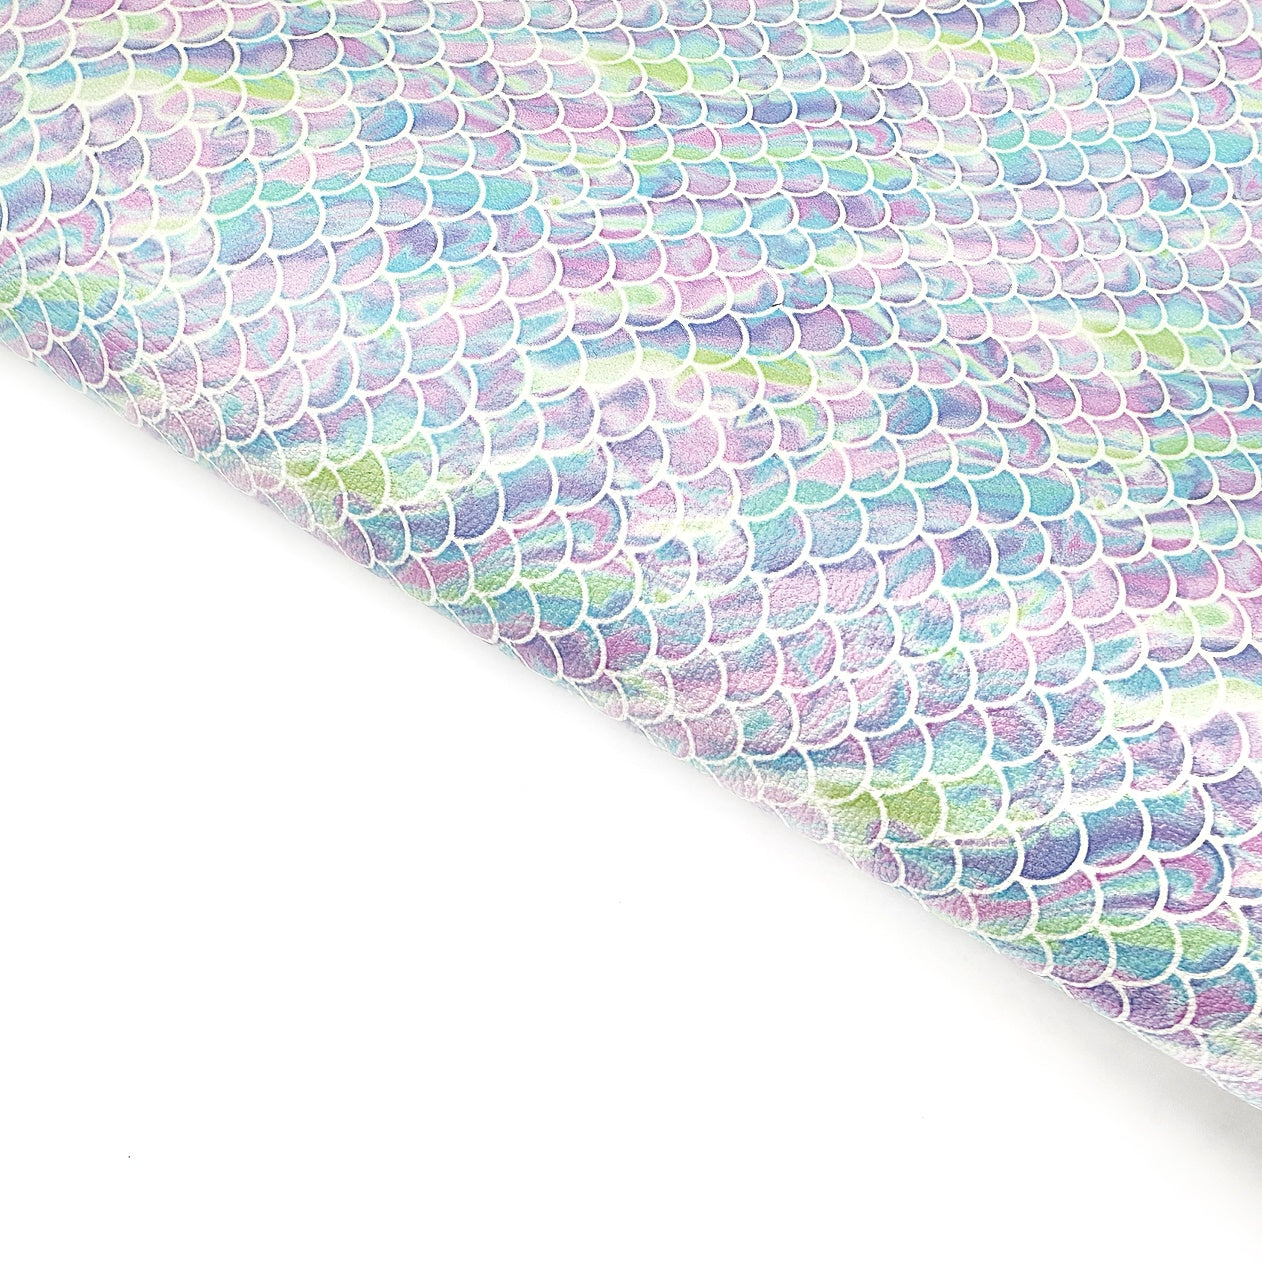 Pastel Marble Mermaid Premium Faux Leather Fabric Sheets